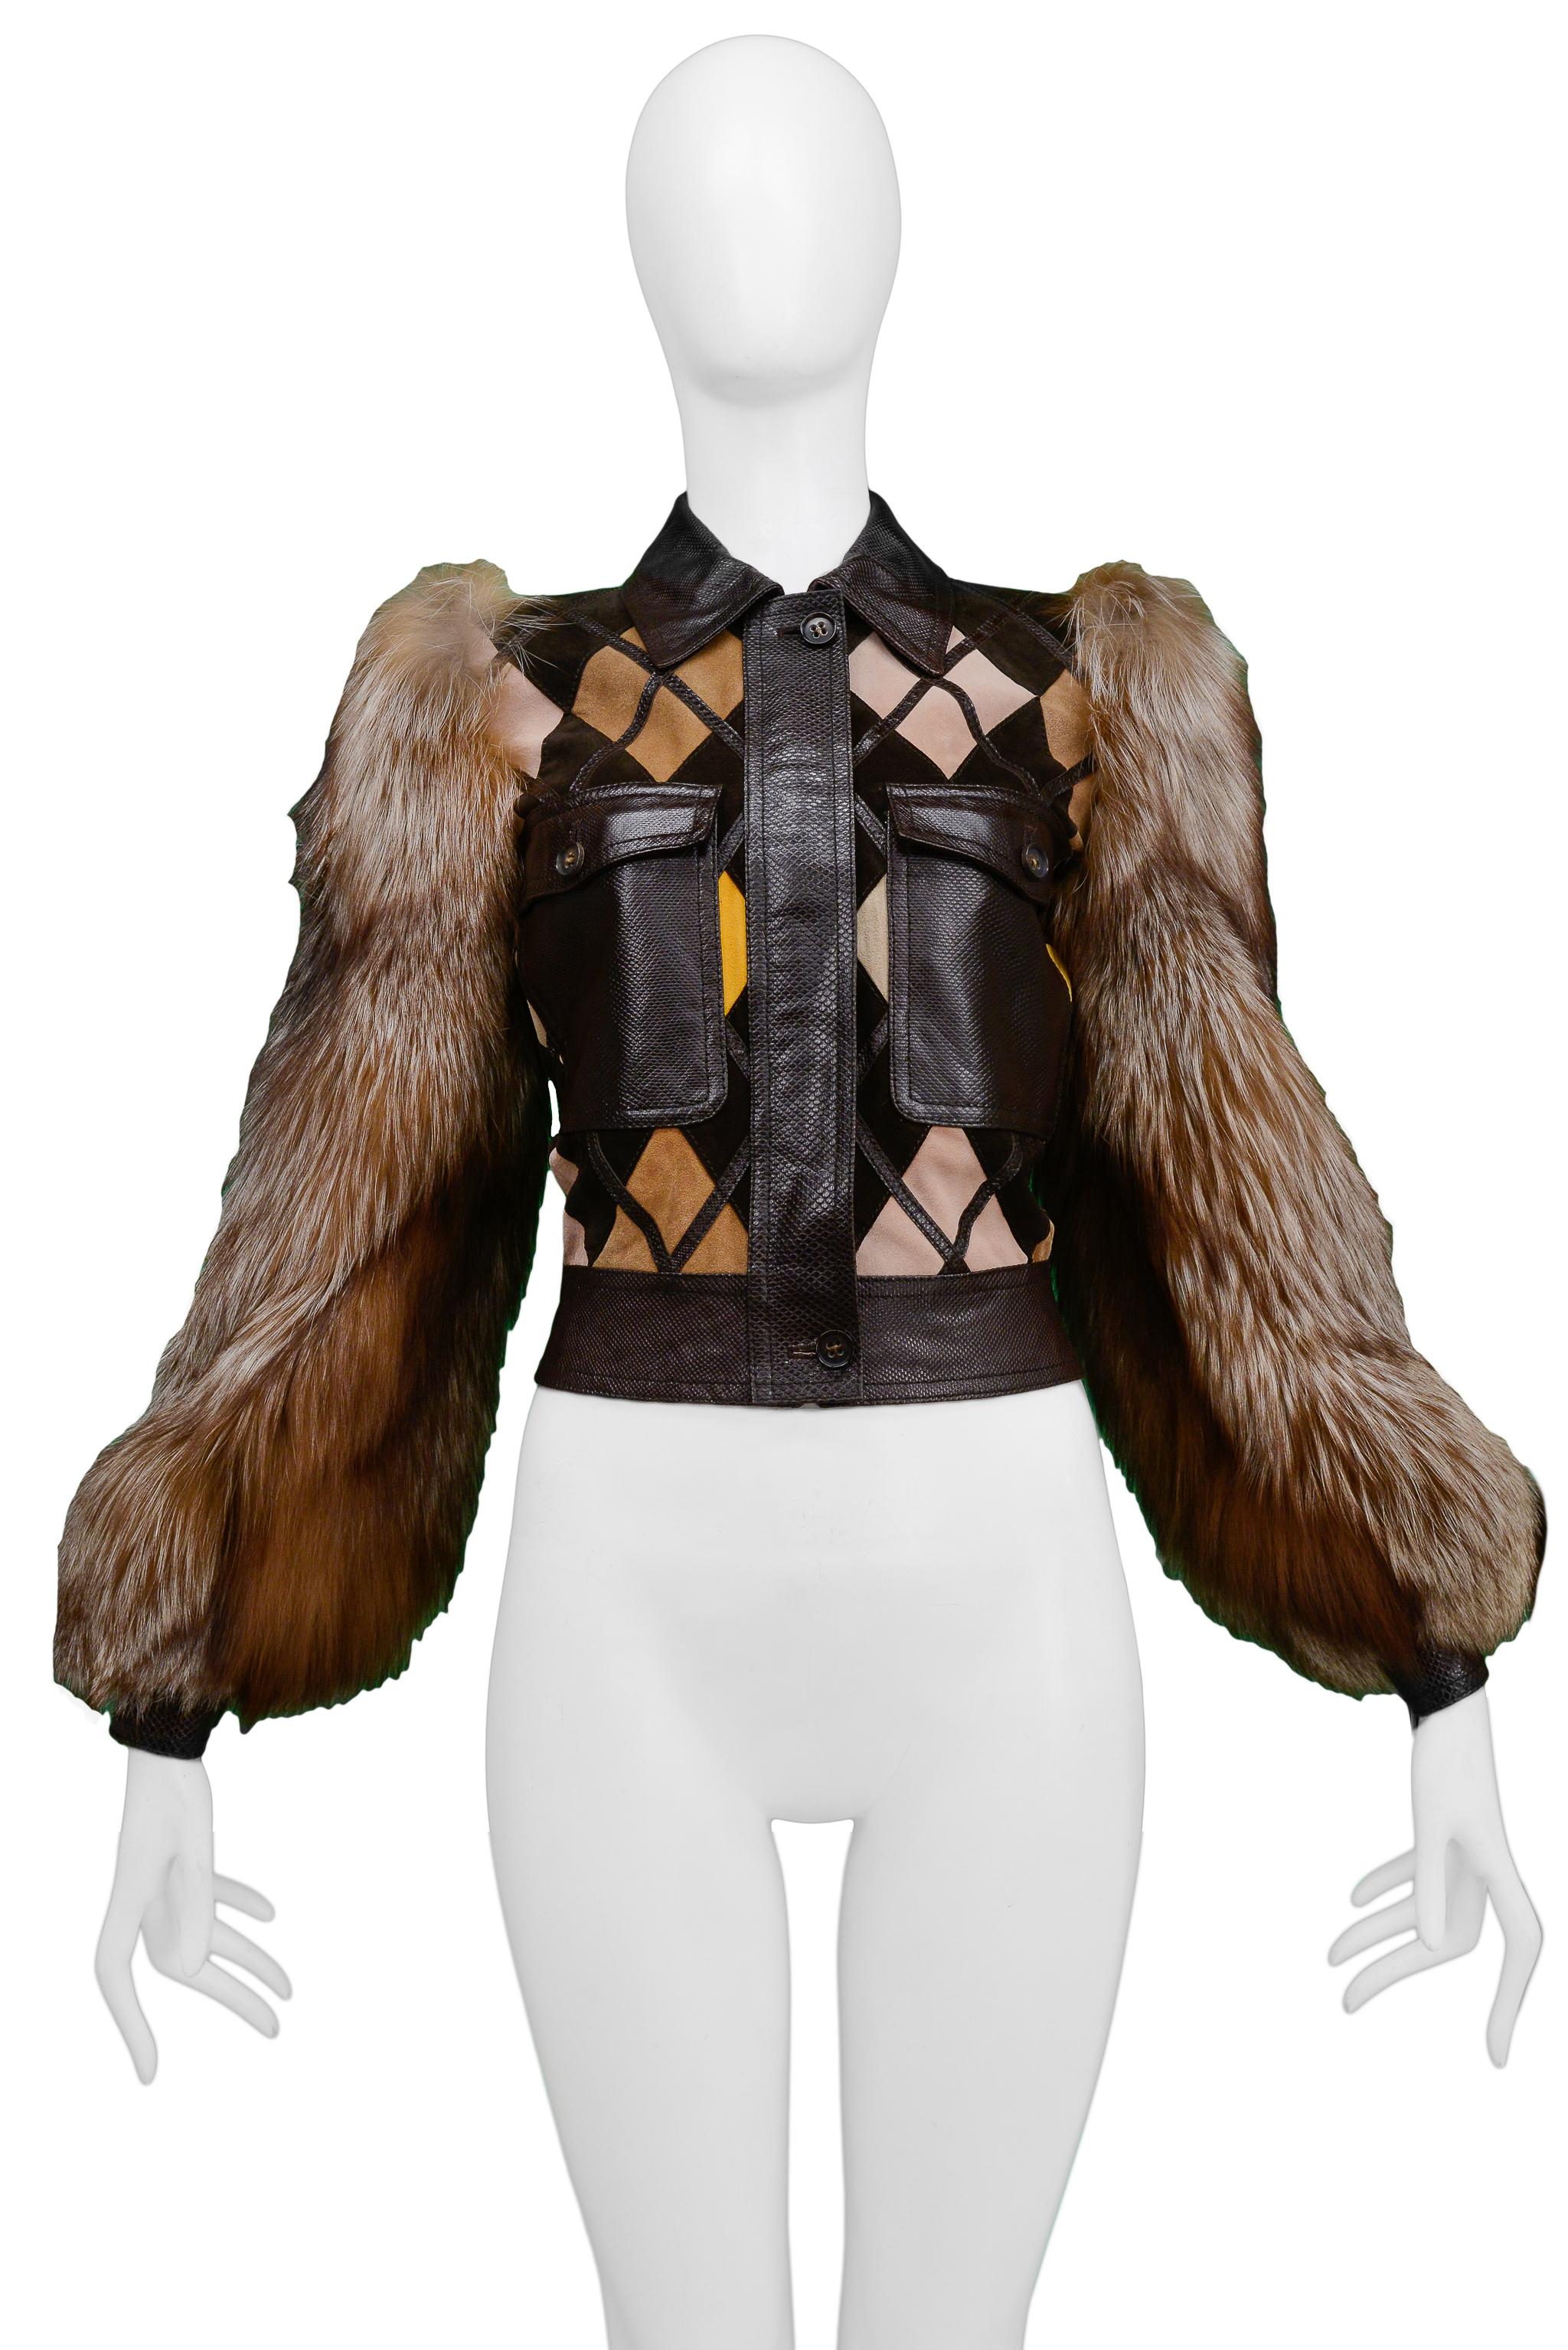 Resurrection Vintage is excited to offer a rare vintage Valentino leather and fur jacket featuring dark brown python texture panels and trim, multicolor diamond leather panels, a folding collar, button front pockets, button placket, full fur